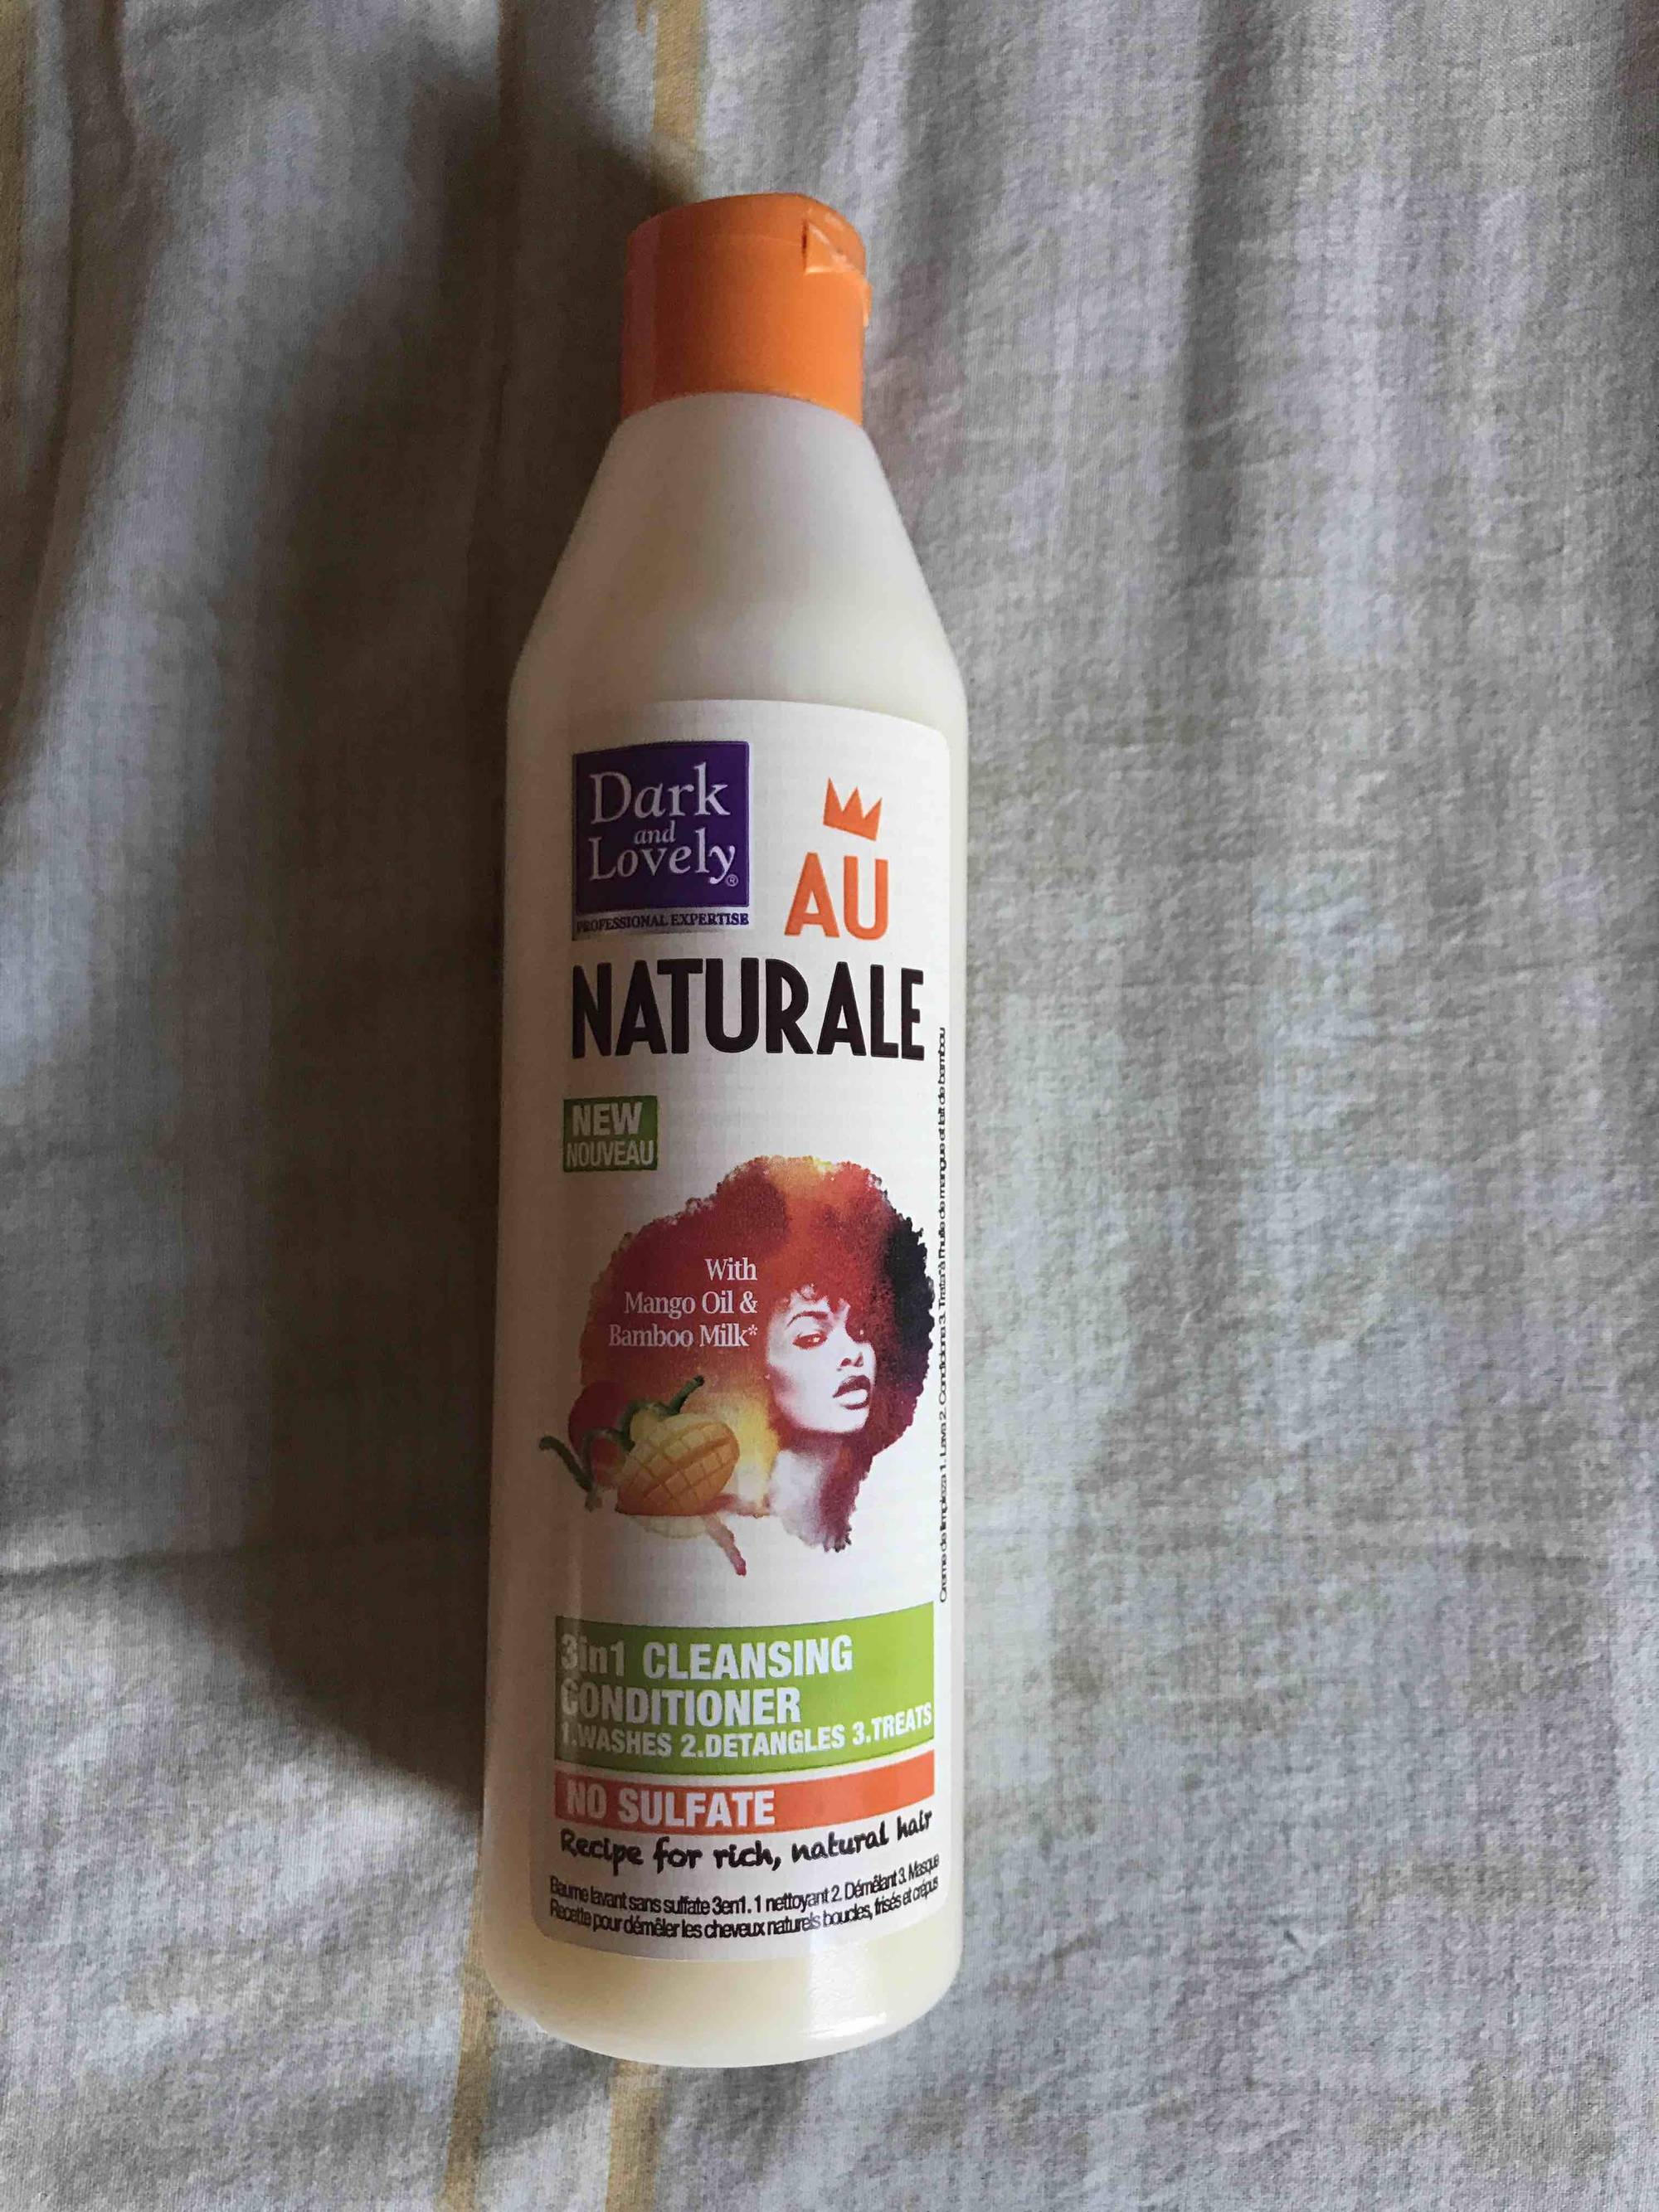 DARK & LOVELY - Au naturale - 3 in 1 cleansing conditioner